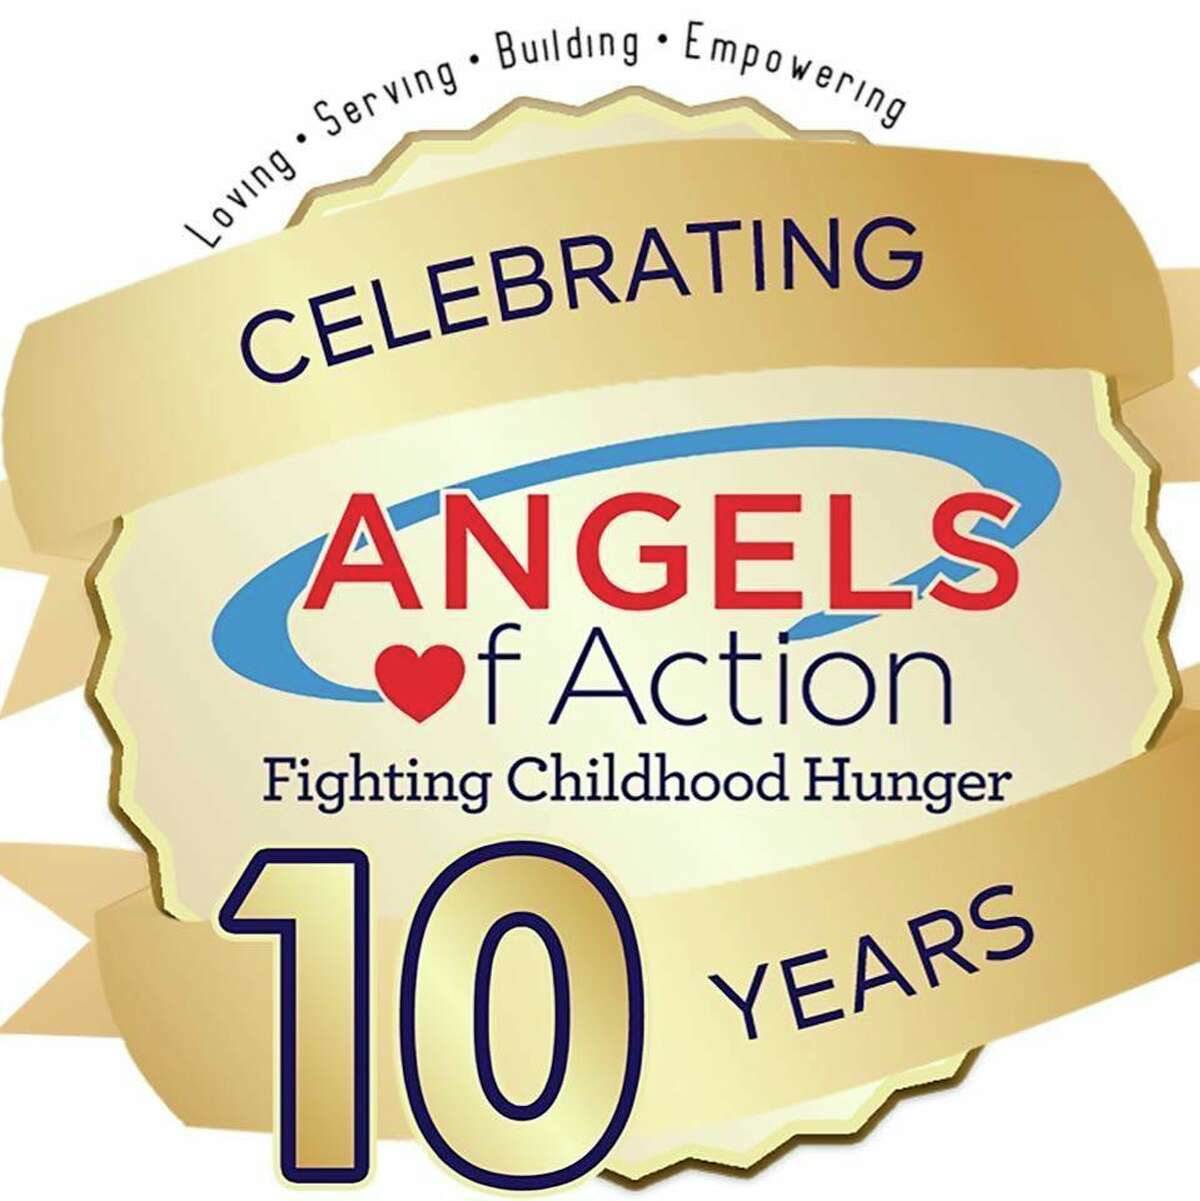 Angels of Action Big Rapids will receive $100,000 in ARPA funds from the county to support programs to alleviate childhood hunger in Mecosta County.